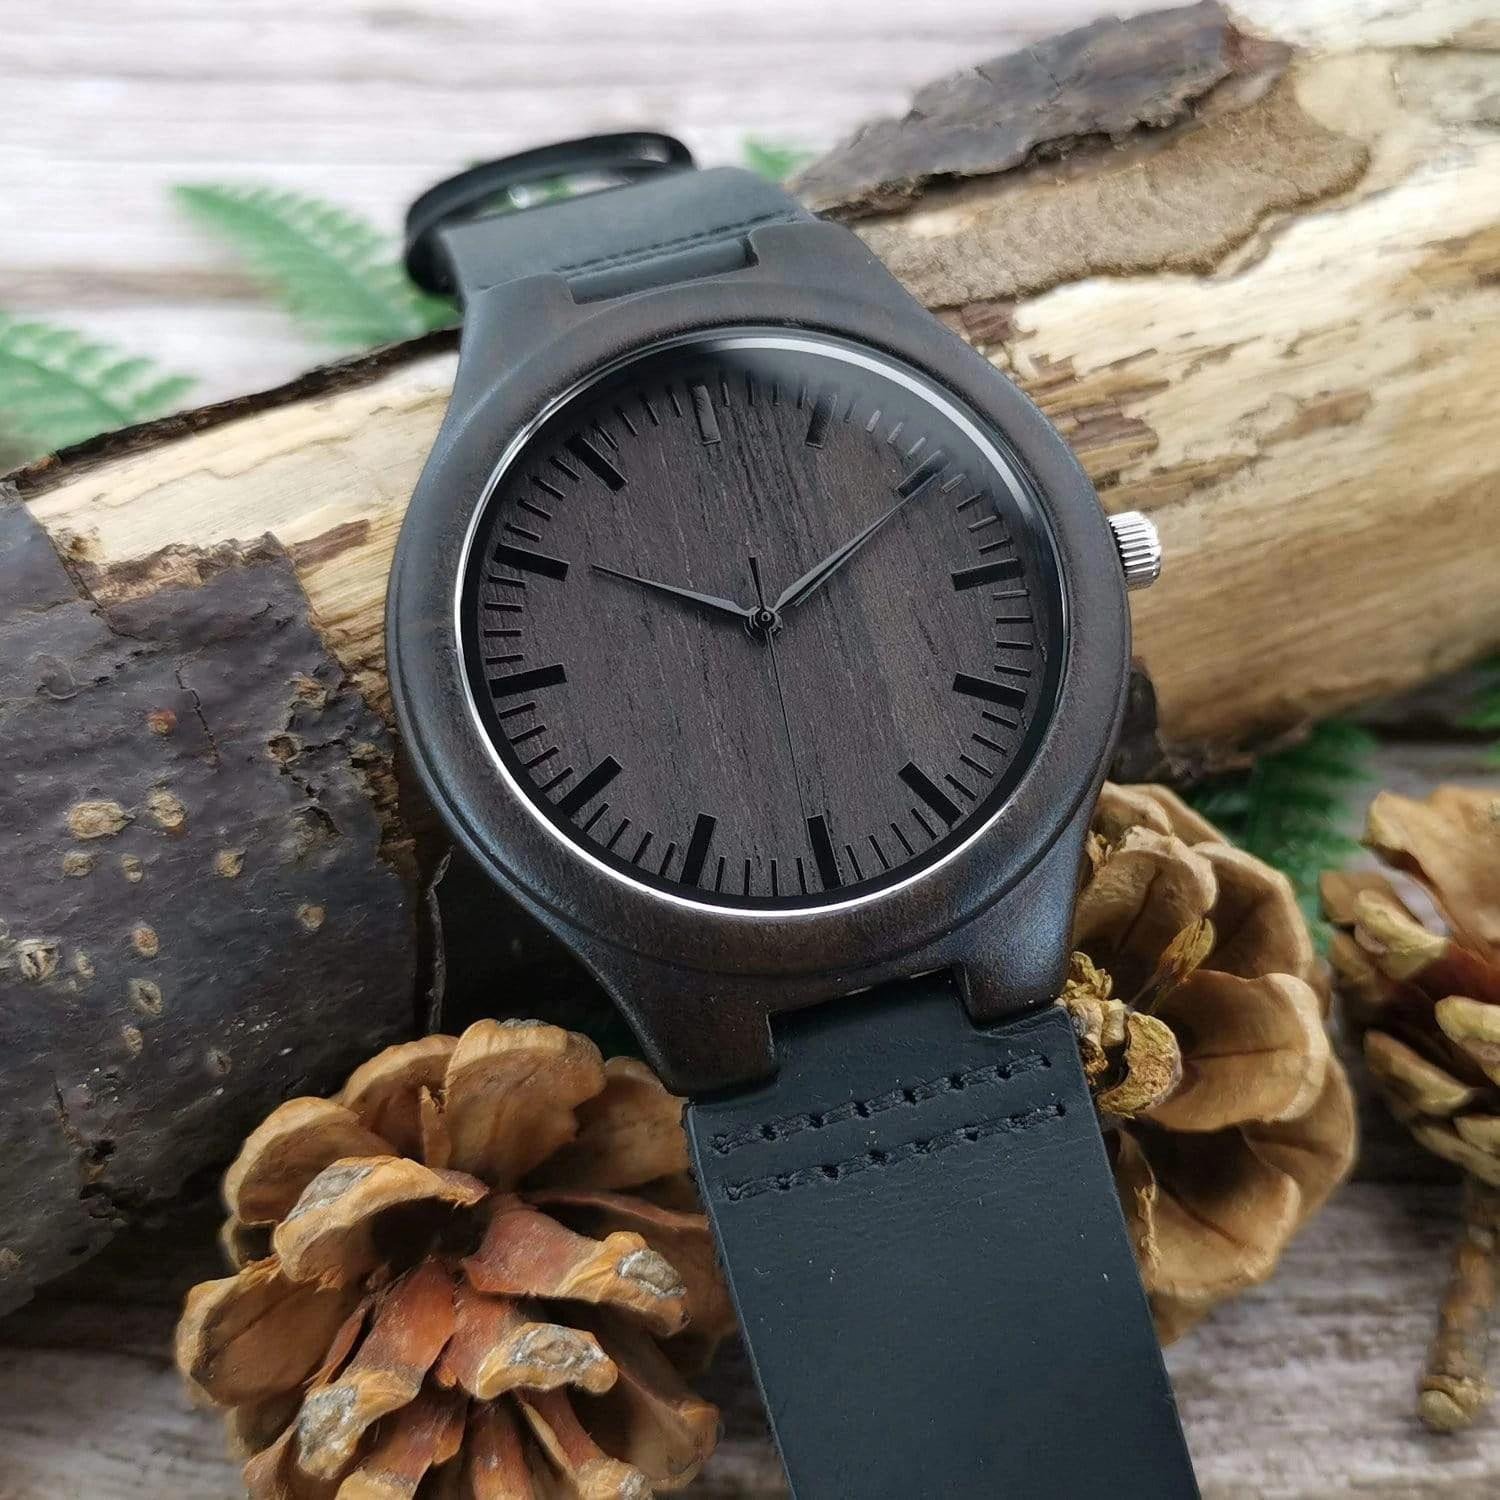 Gift For Boyfriend Love You For All That You Are Engraved Wooden Watch